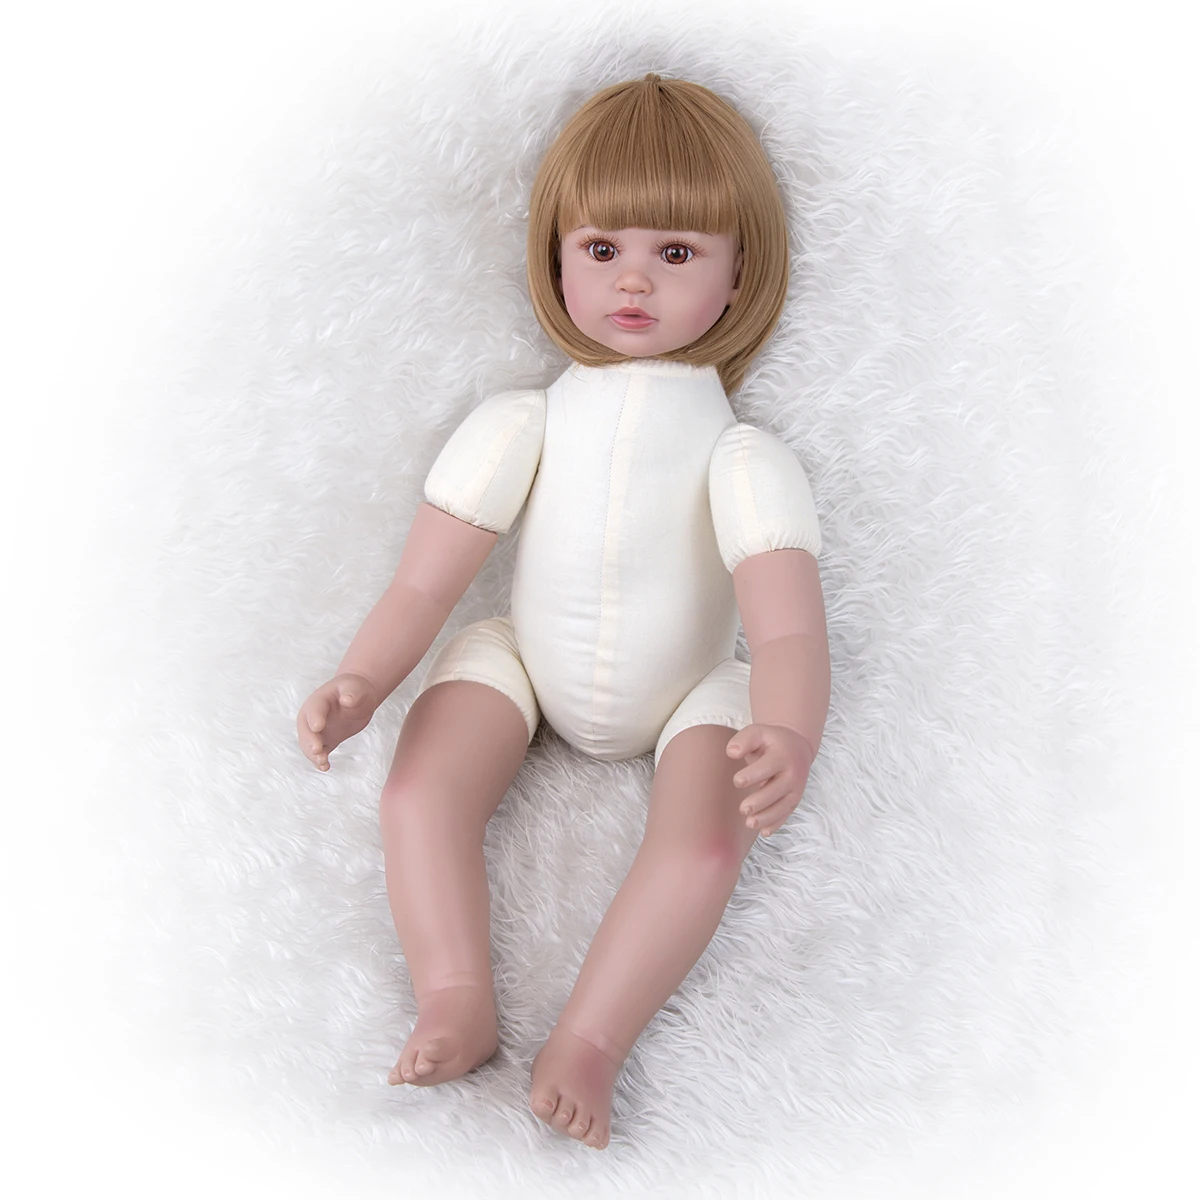 KEIUMI 24 Inch Beautiful Reborn Baby Doll Newborn Cute Baby Doll Cloth Body Stuffed PP Cotton For Children Gifts X-mas Birthday images - 6